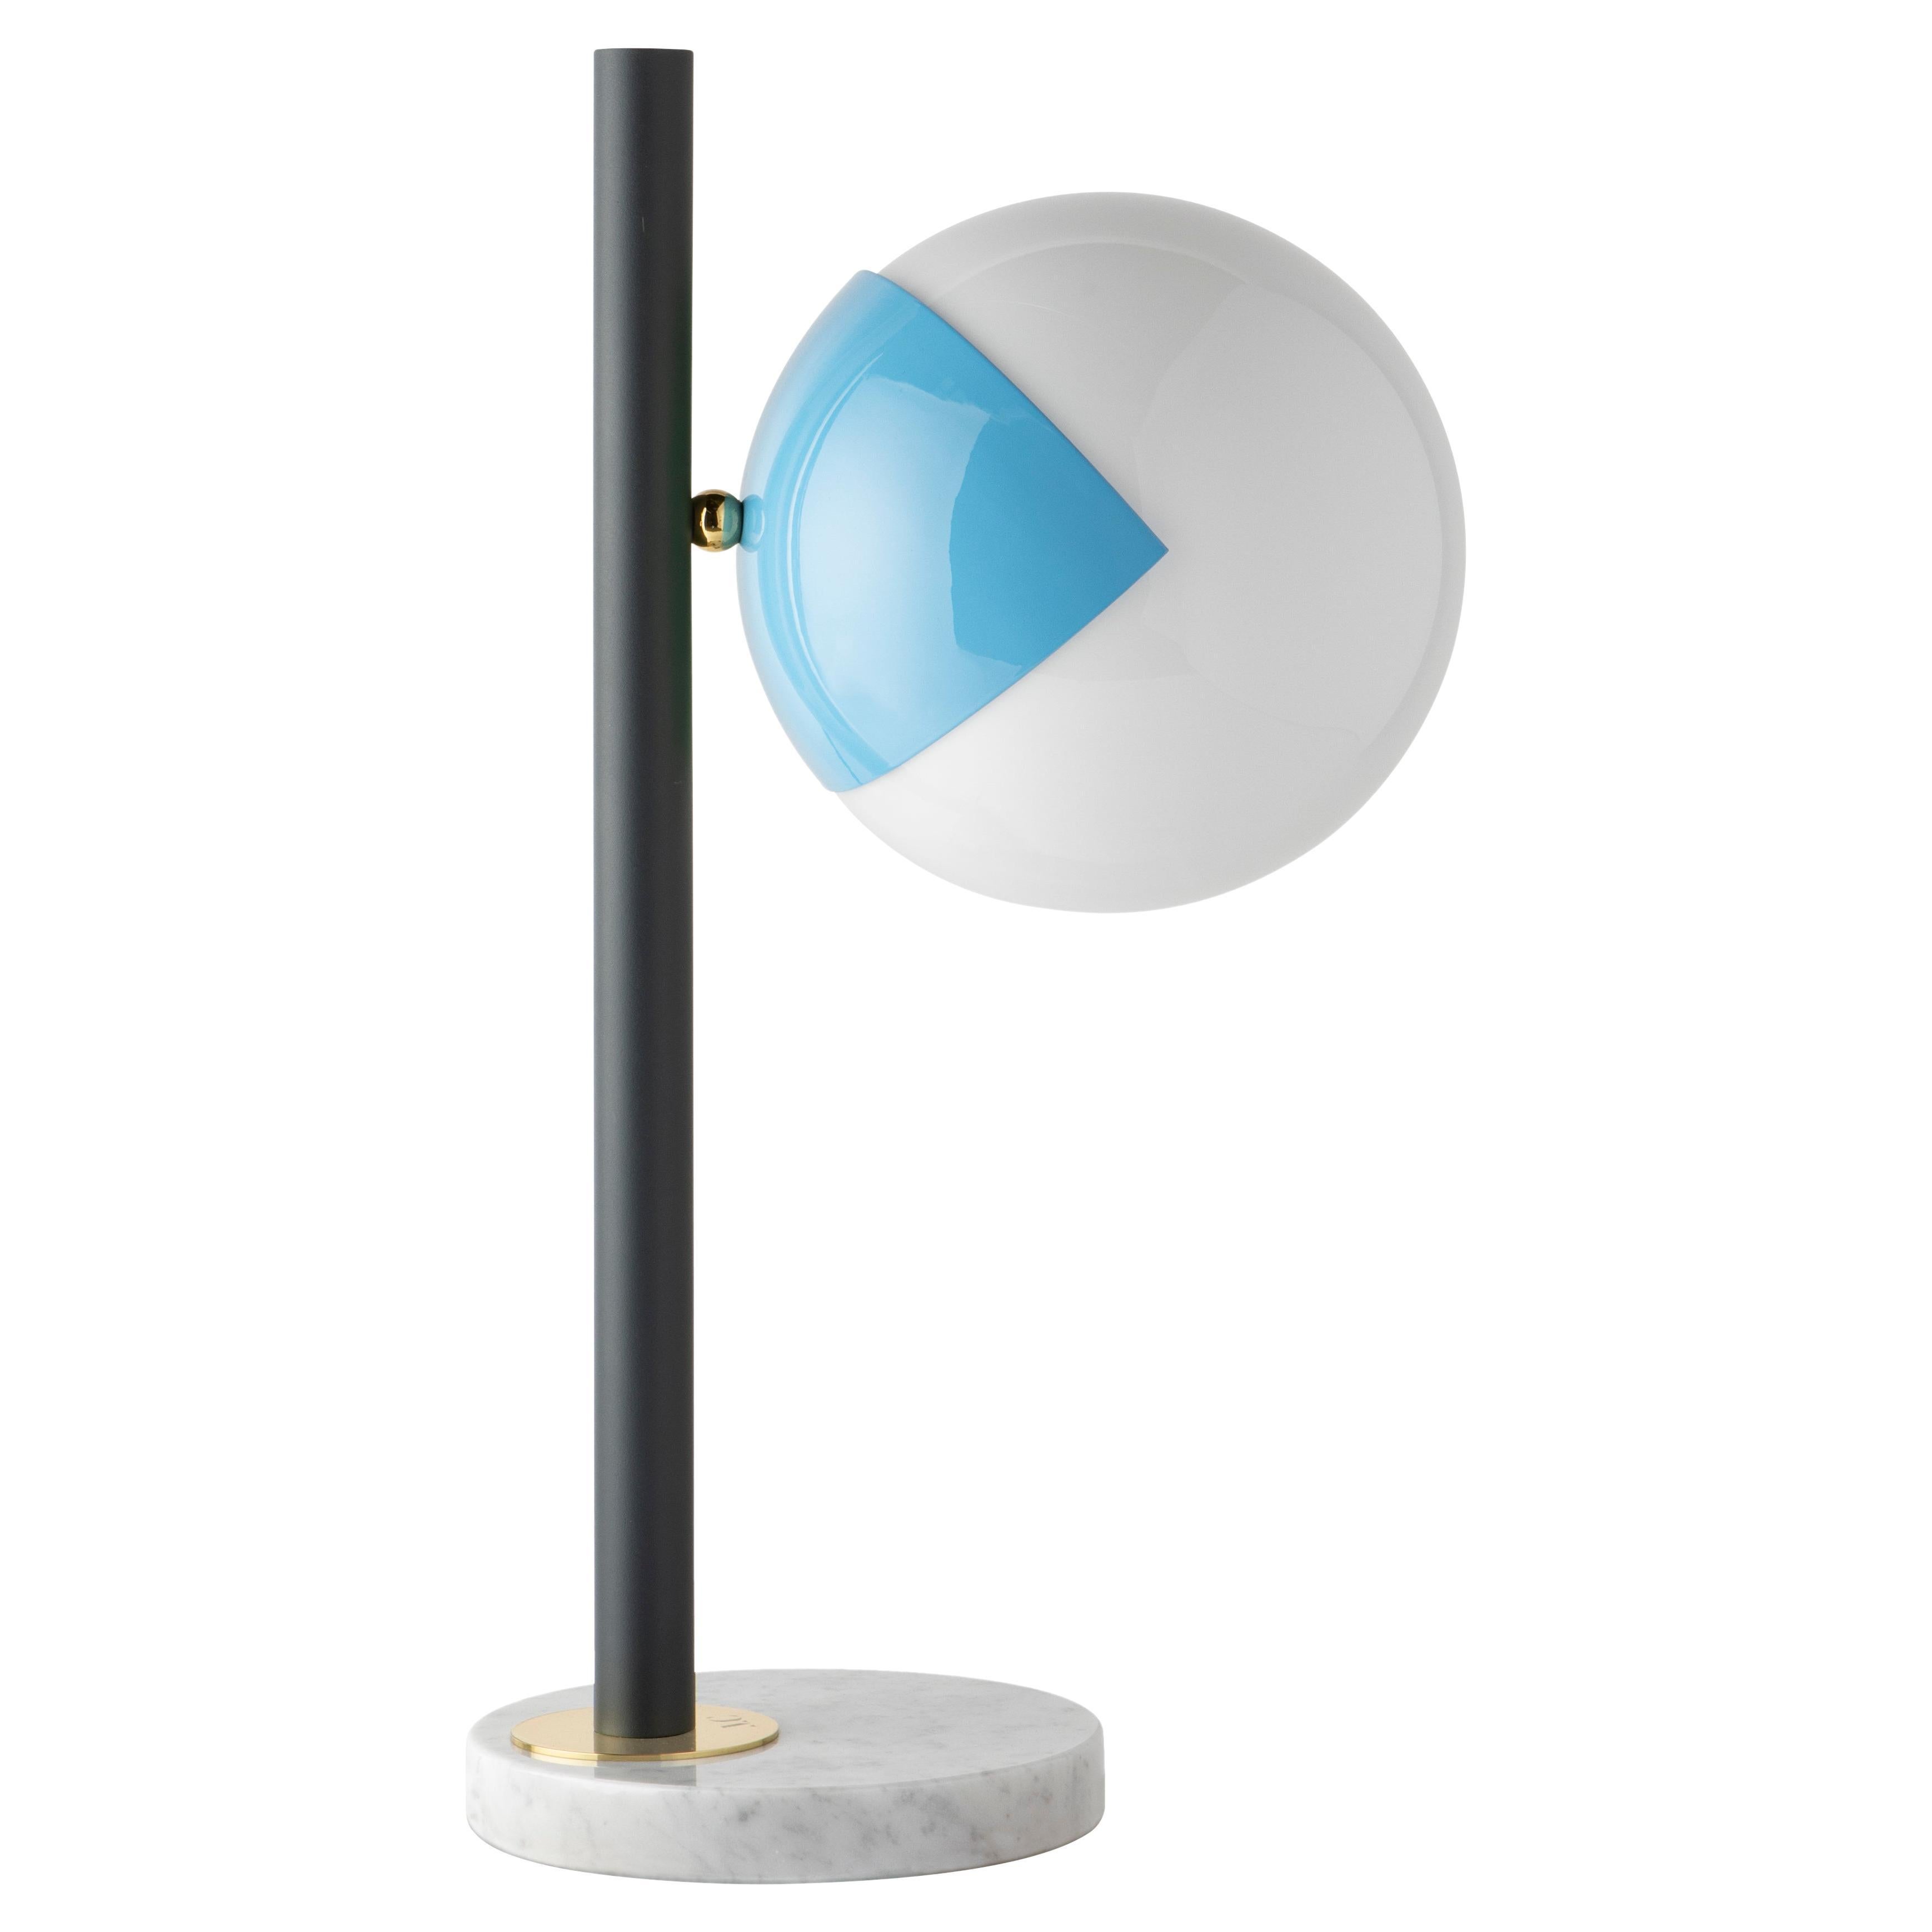 Pink dimmable table lamp pop-up black by Magic Circus Editions
Dimensions: Ø 22 x 30 x 53 cm 
Materials: Carrara marble base, smooth brass tube, glossy mouth blown glass

All our lamps can be wired according to each country. If sold to the USA